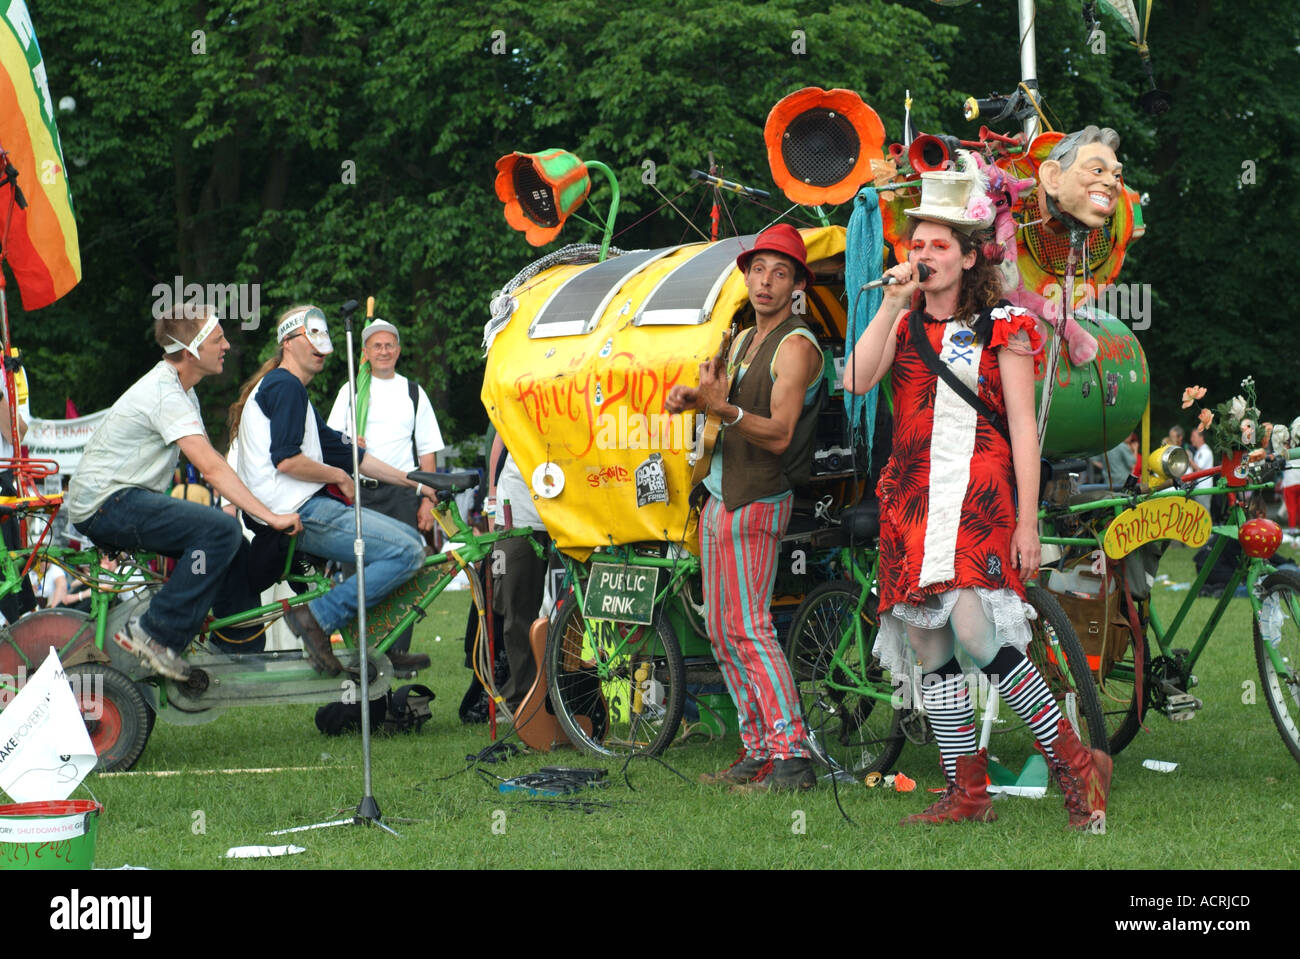 Performing in front of the Rinky Dink mobile sound system at the MAKE POVERTY HISTORY rally on the Meadows Stock Photo